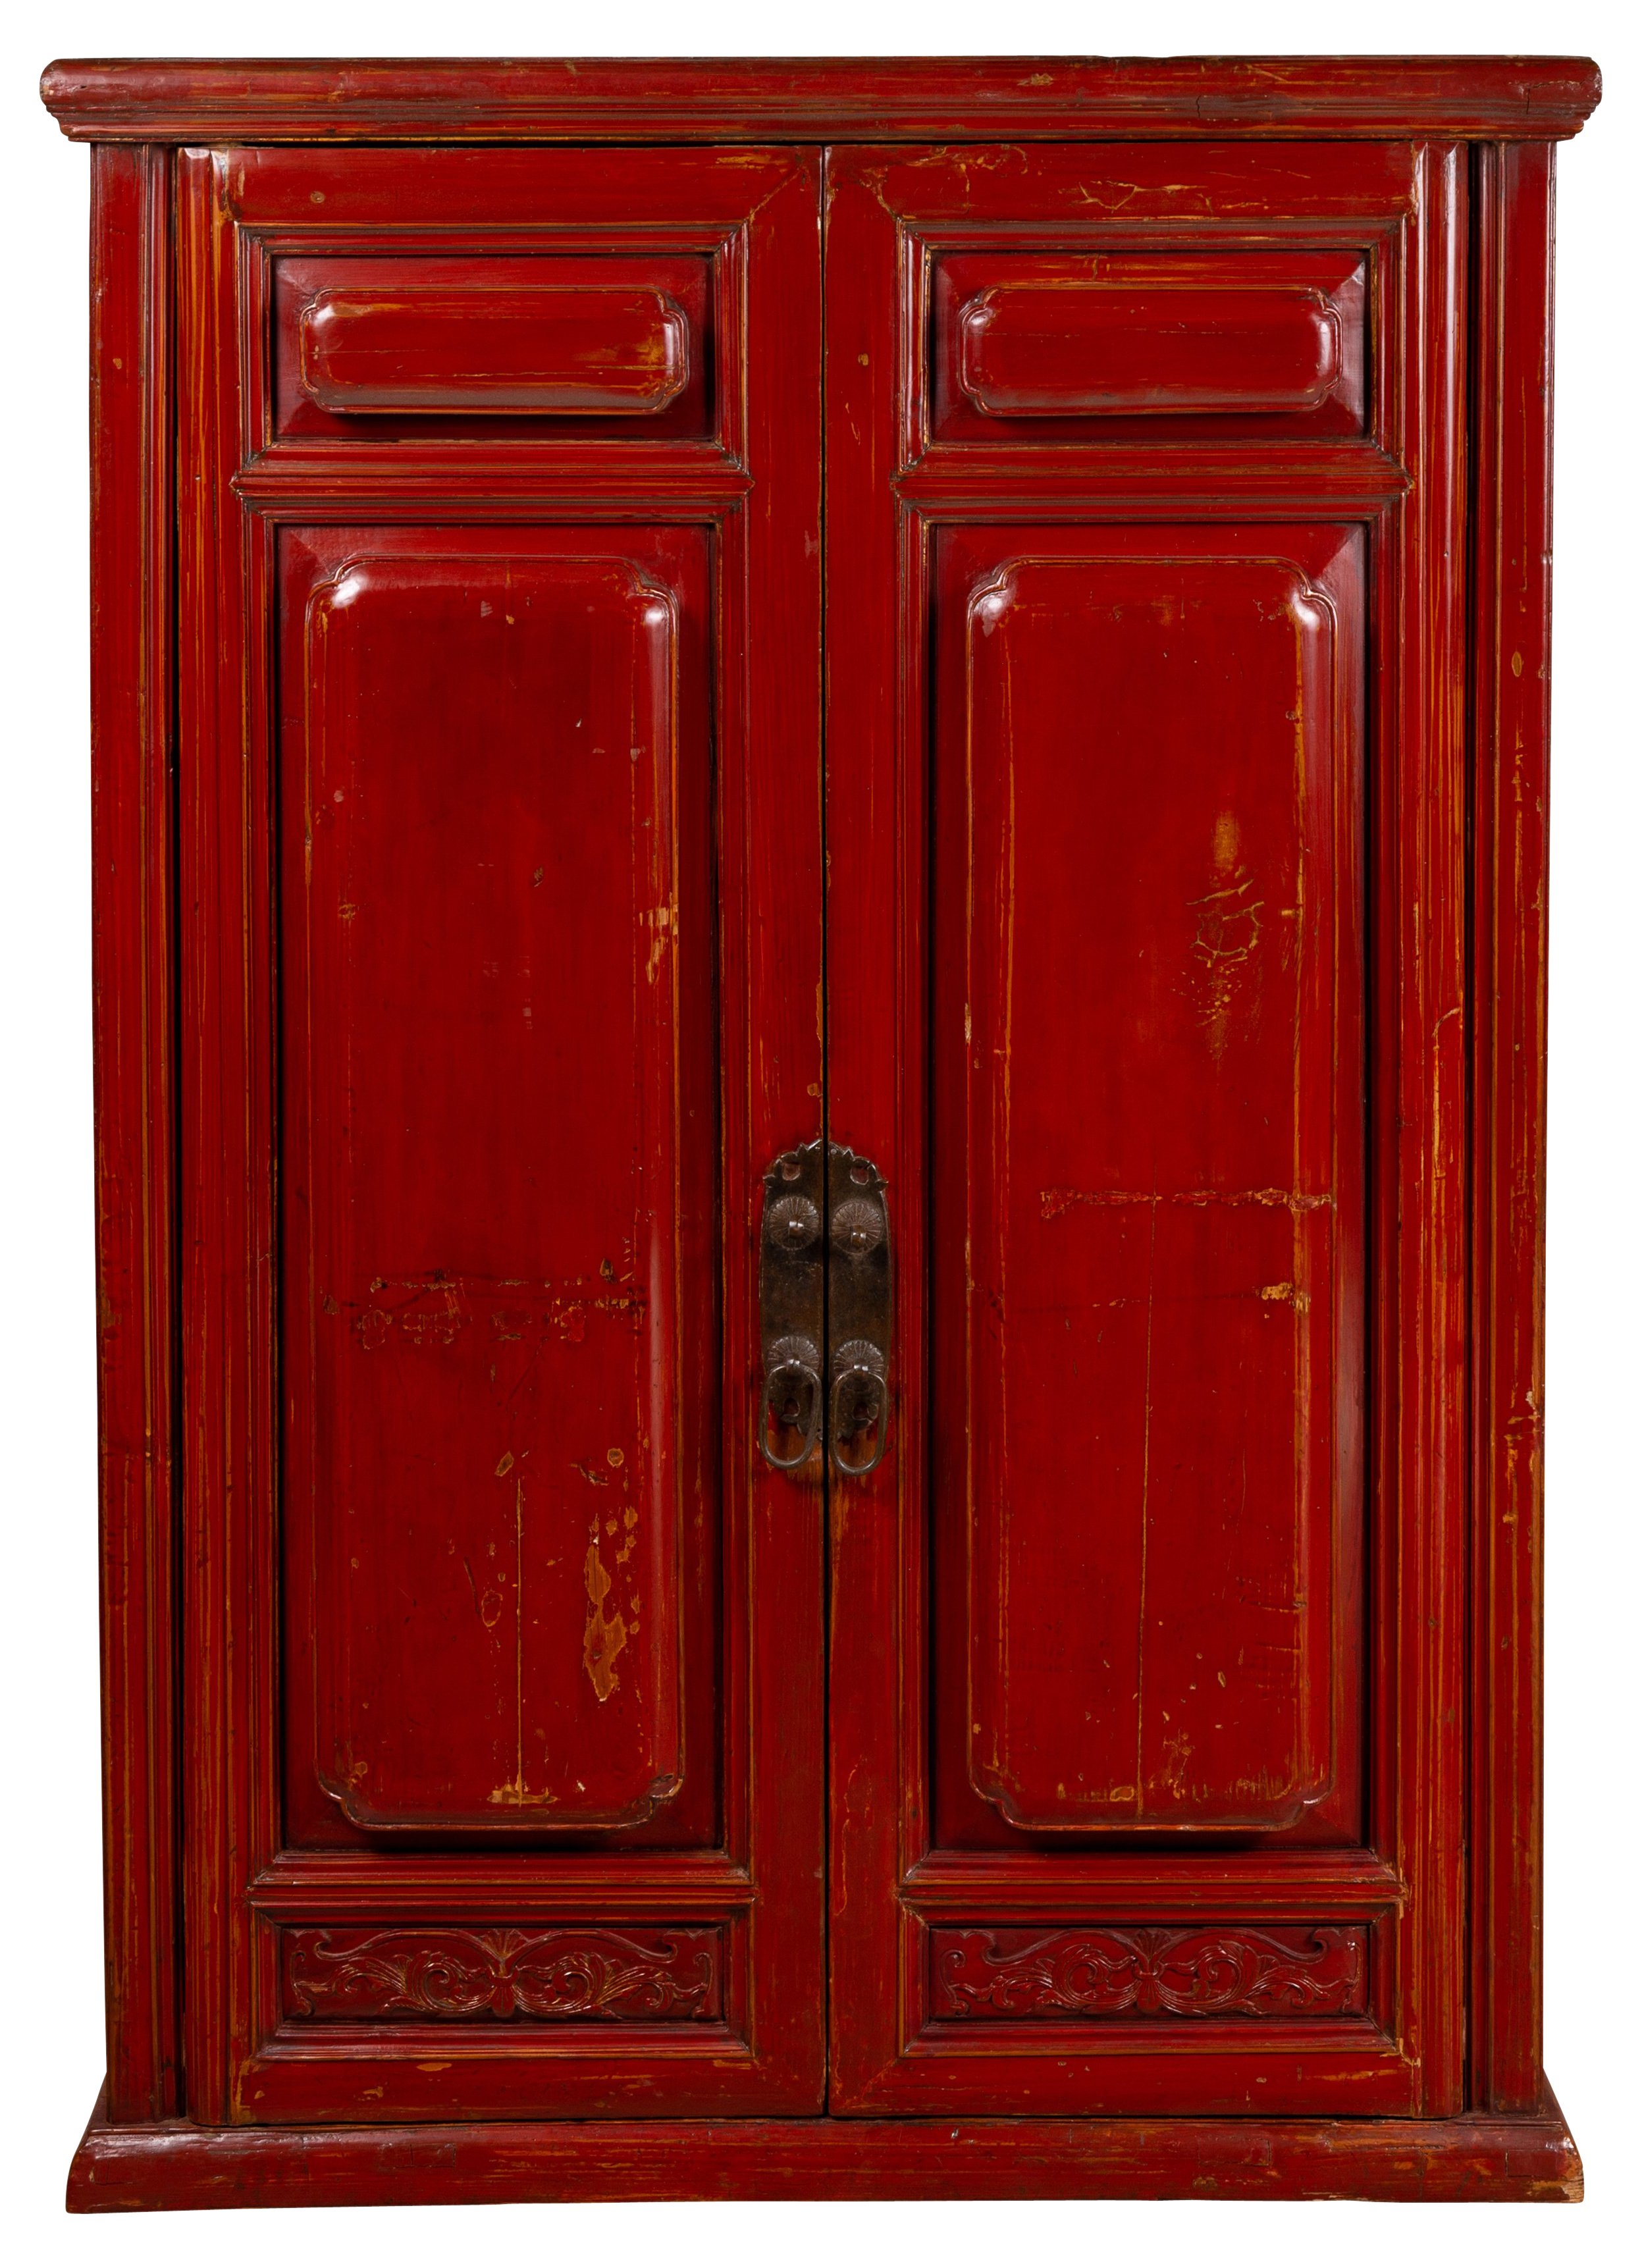 Chinese Red Cabinet with Gold Accents~P77555452